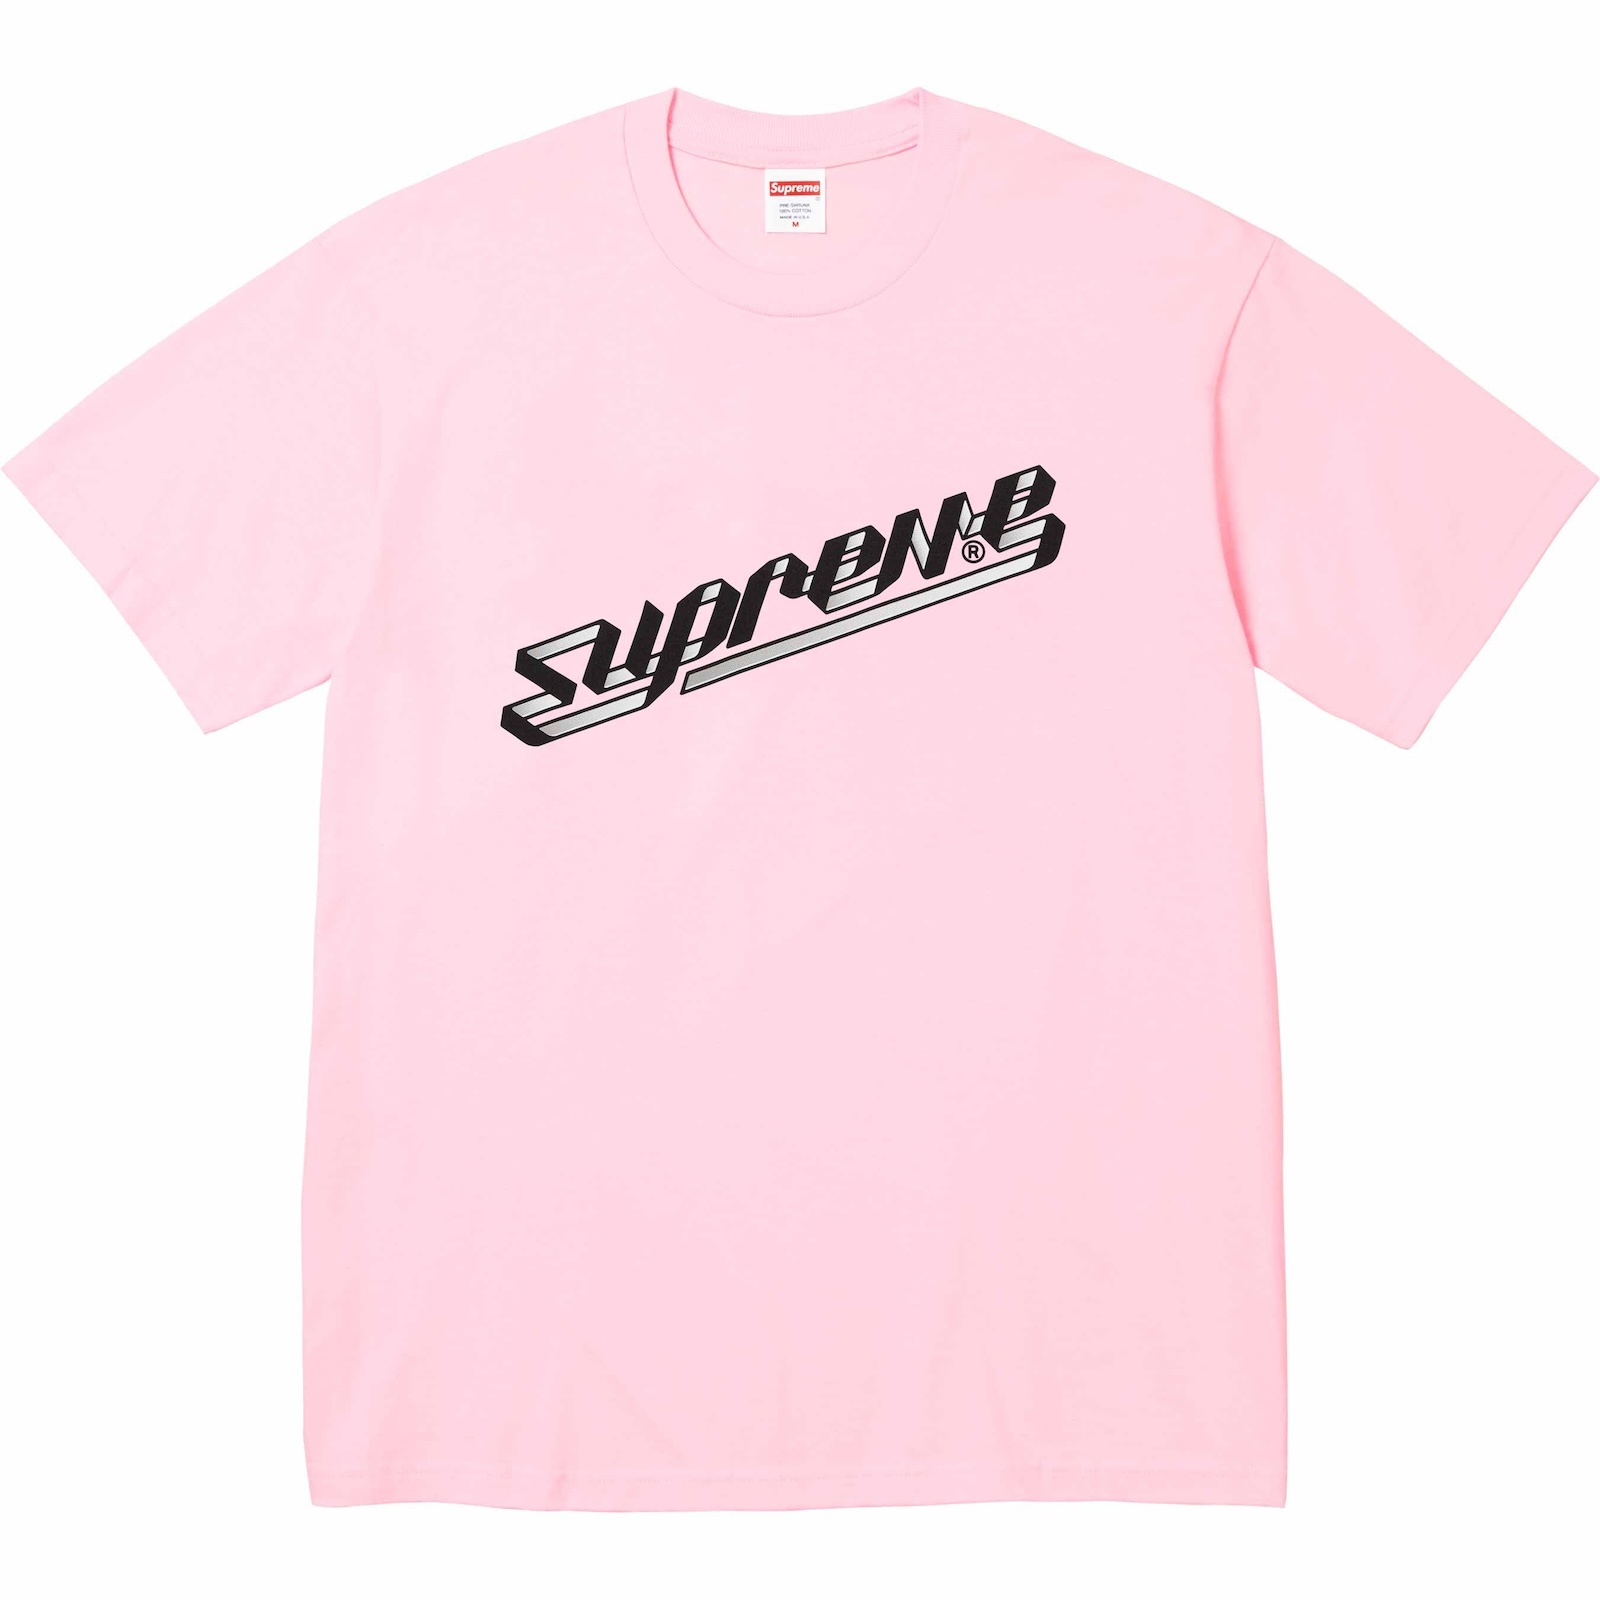  Supreme 2023 Winter Tees Collection Release Date